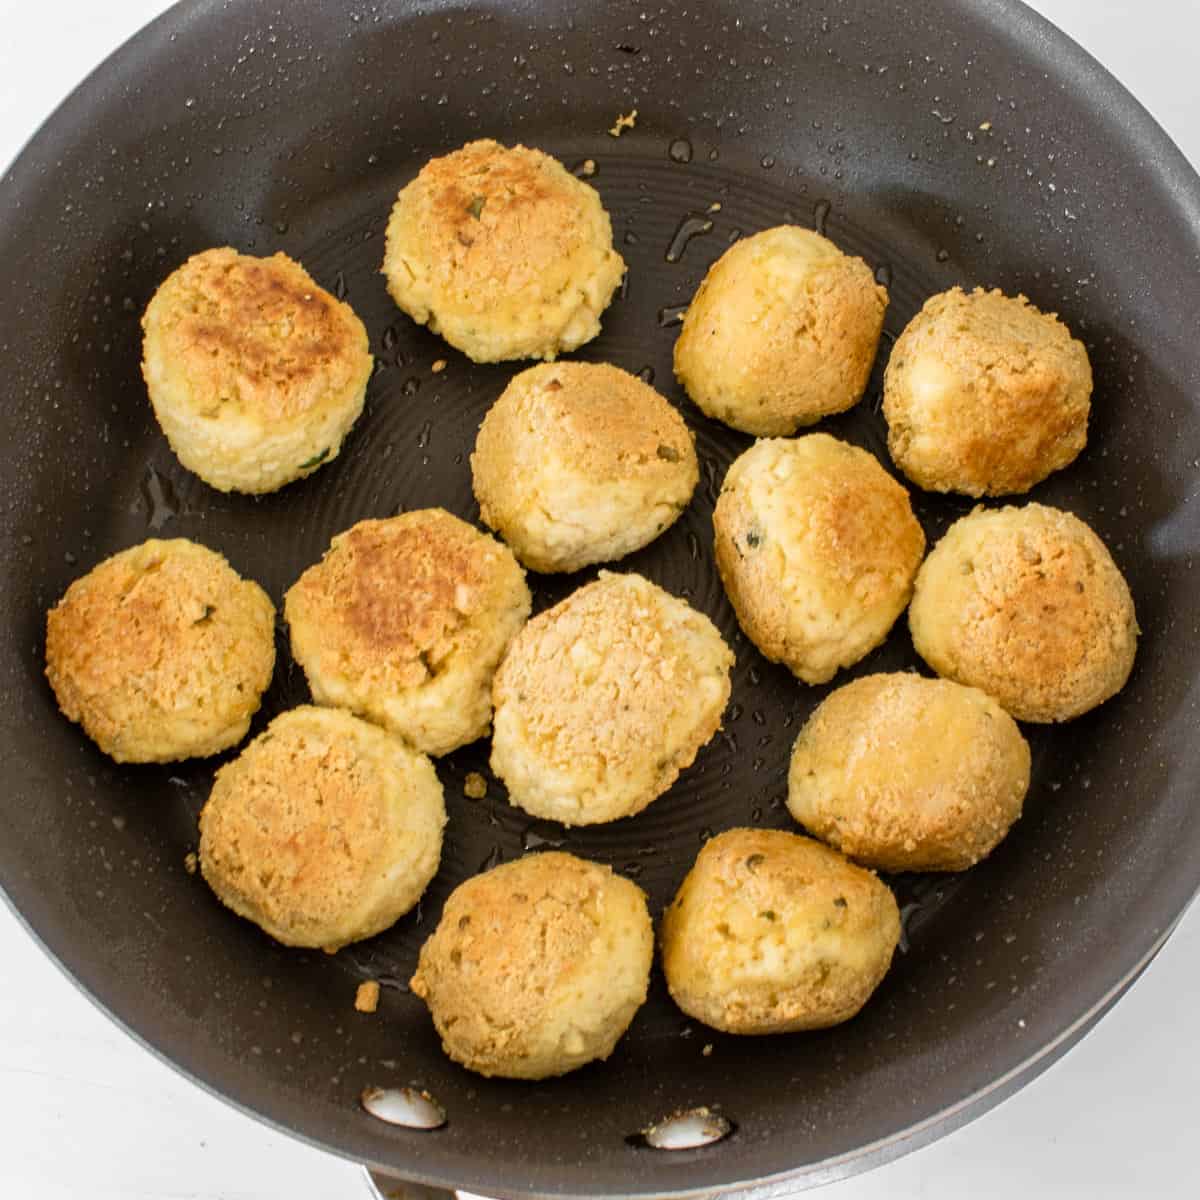 cooked meatballs in a nonstick pan.